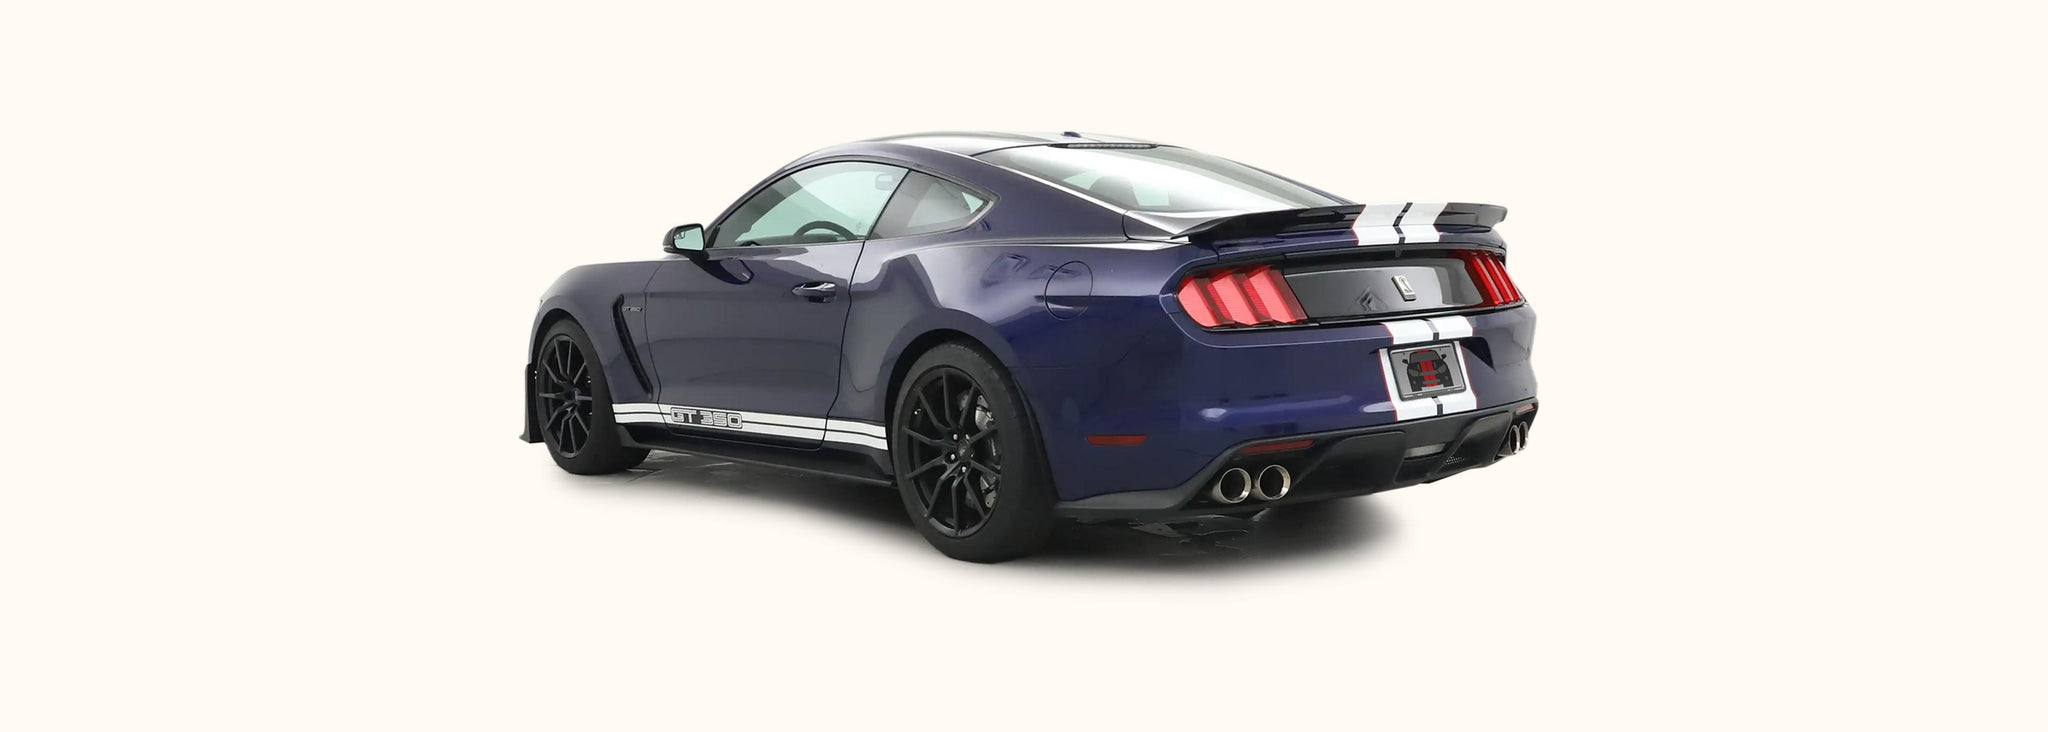 Shelby GT350 Side Stripes with GT350 Text (2015-2020) - Stripe Source